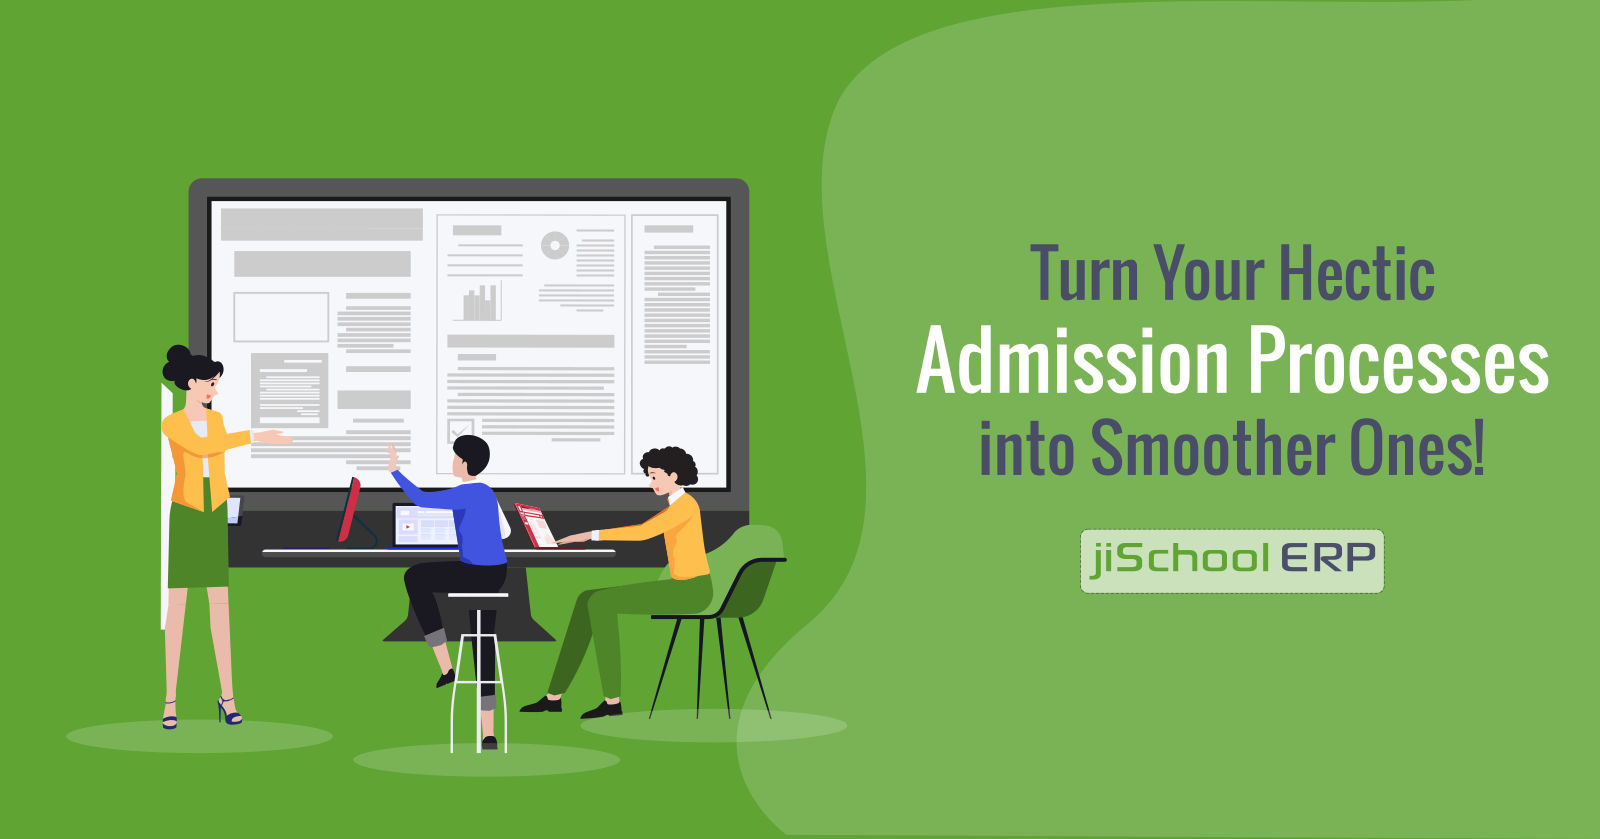 Turn Your Hectic Admission Processes Into Smoother Ones!